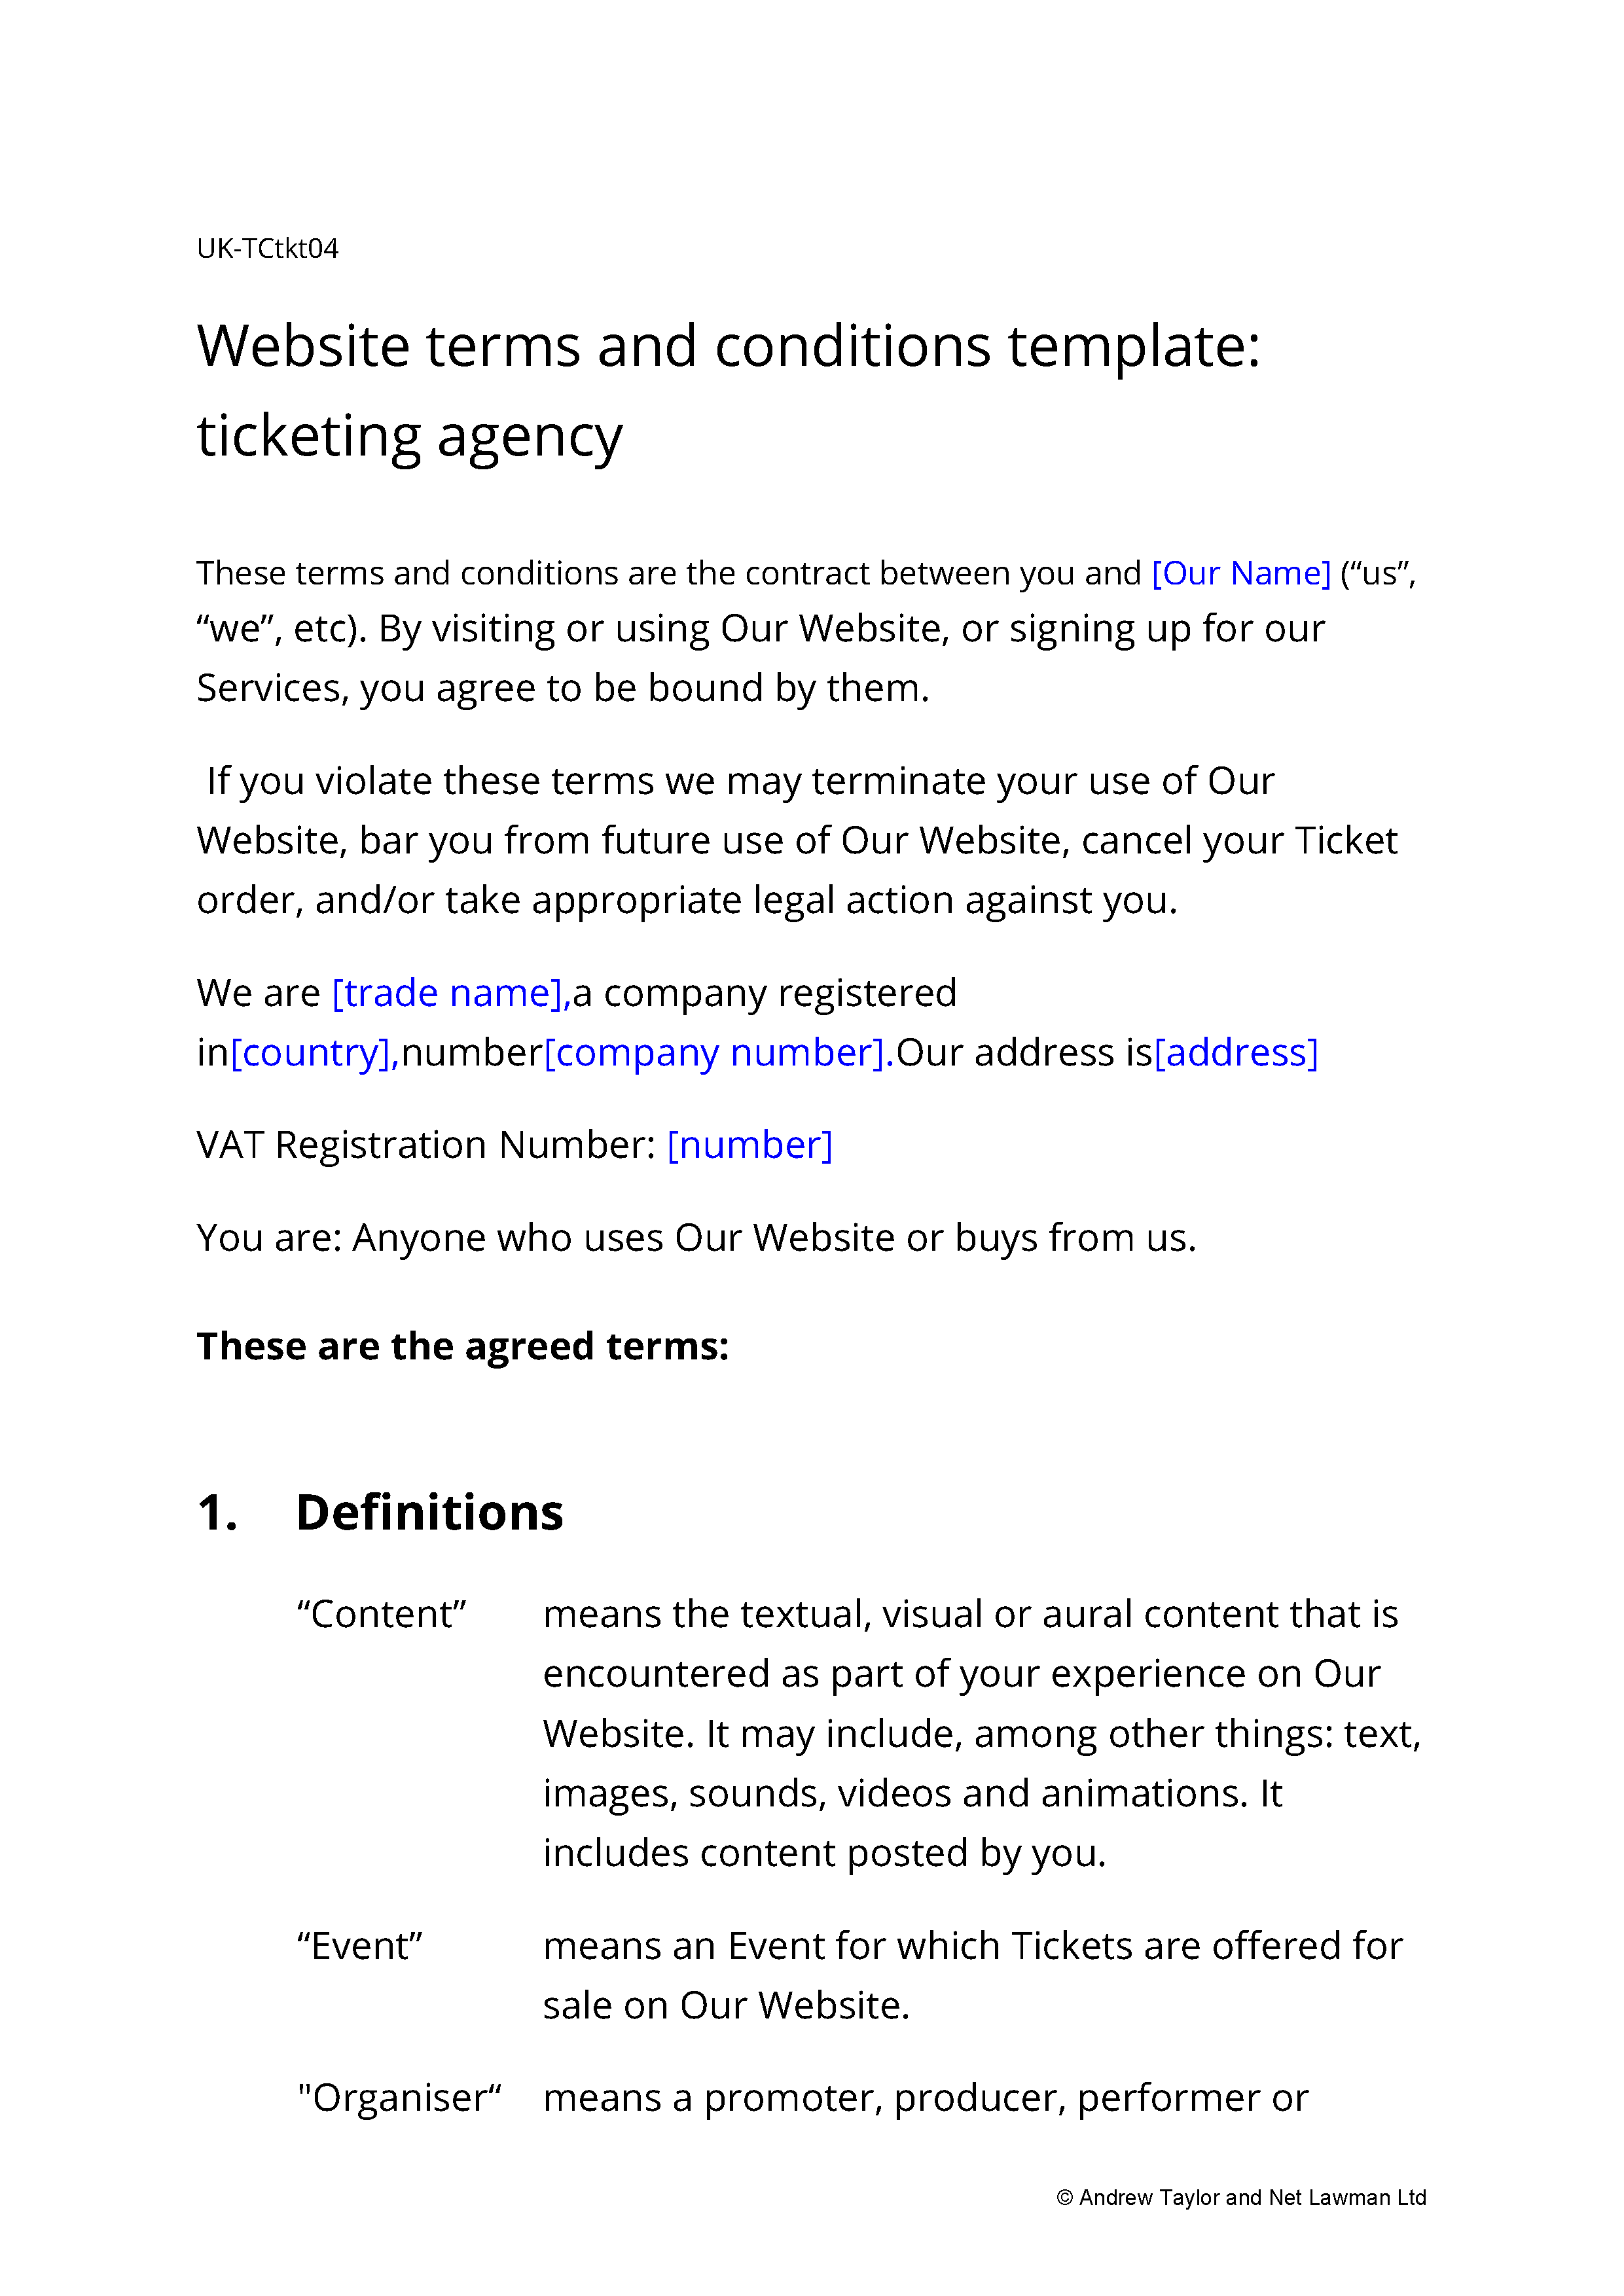 Sample page from the website terms for a ticketing agency